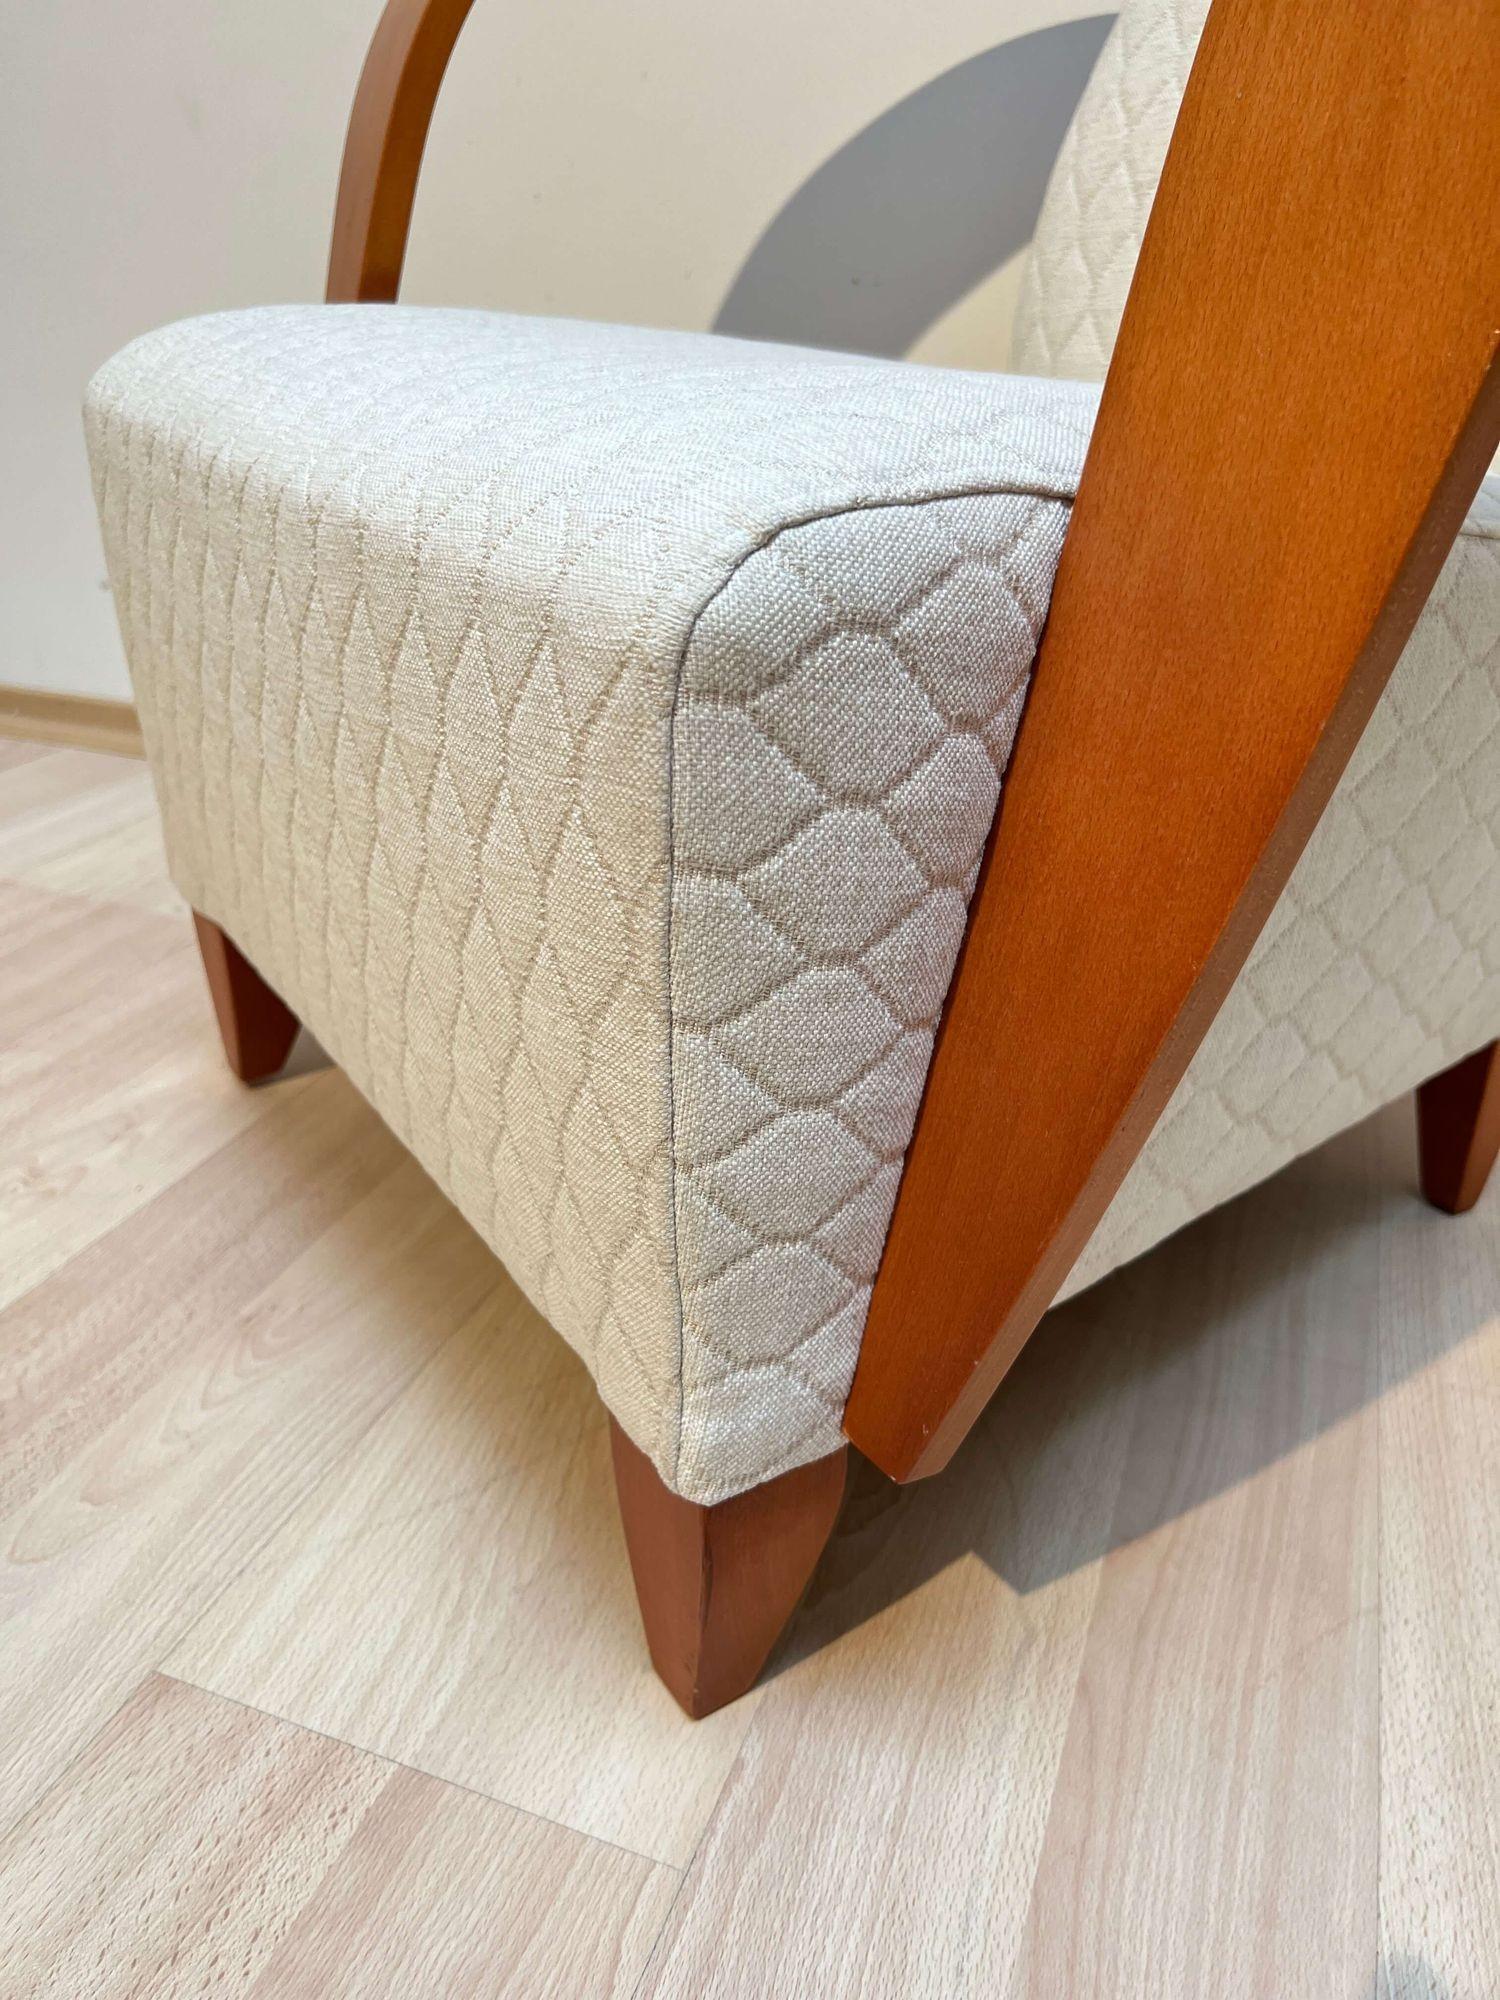 Design Arm Chair, Beech Wood, Cream-white Quilt Fabric, Spain, 1990s For Sale 6